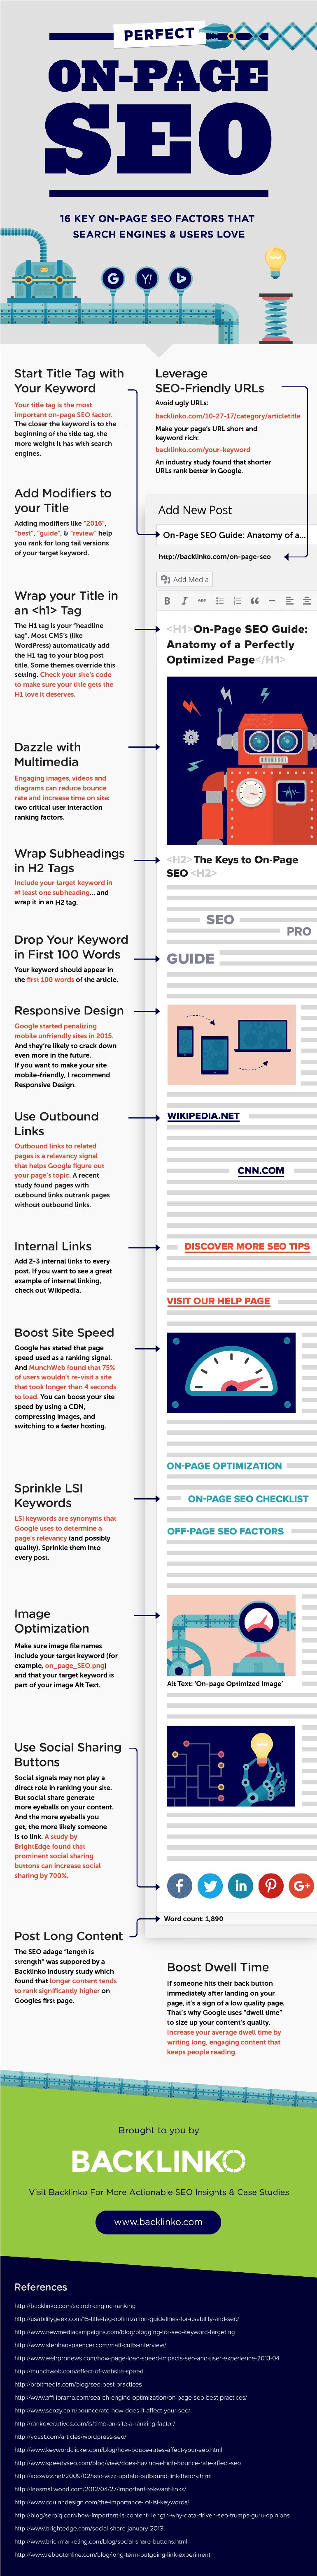 On-Page Ranking Factors Infographic from Backlinko